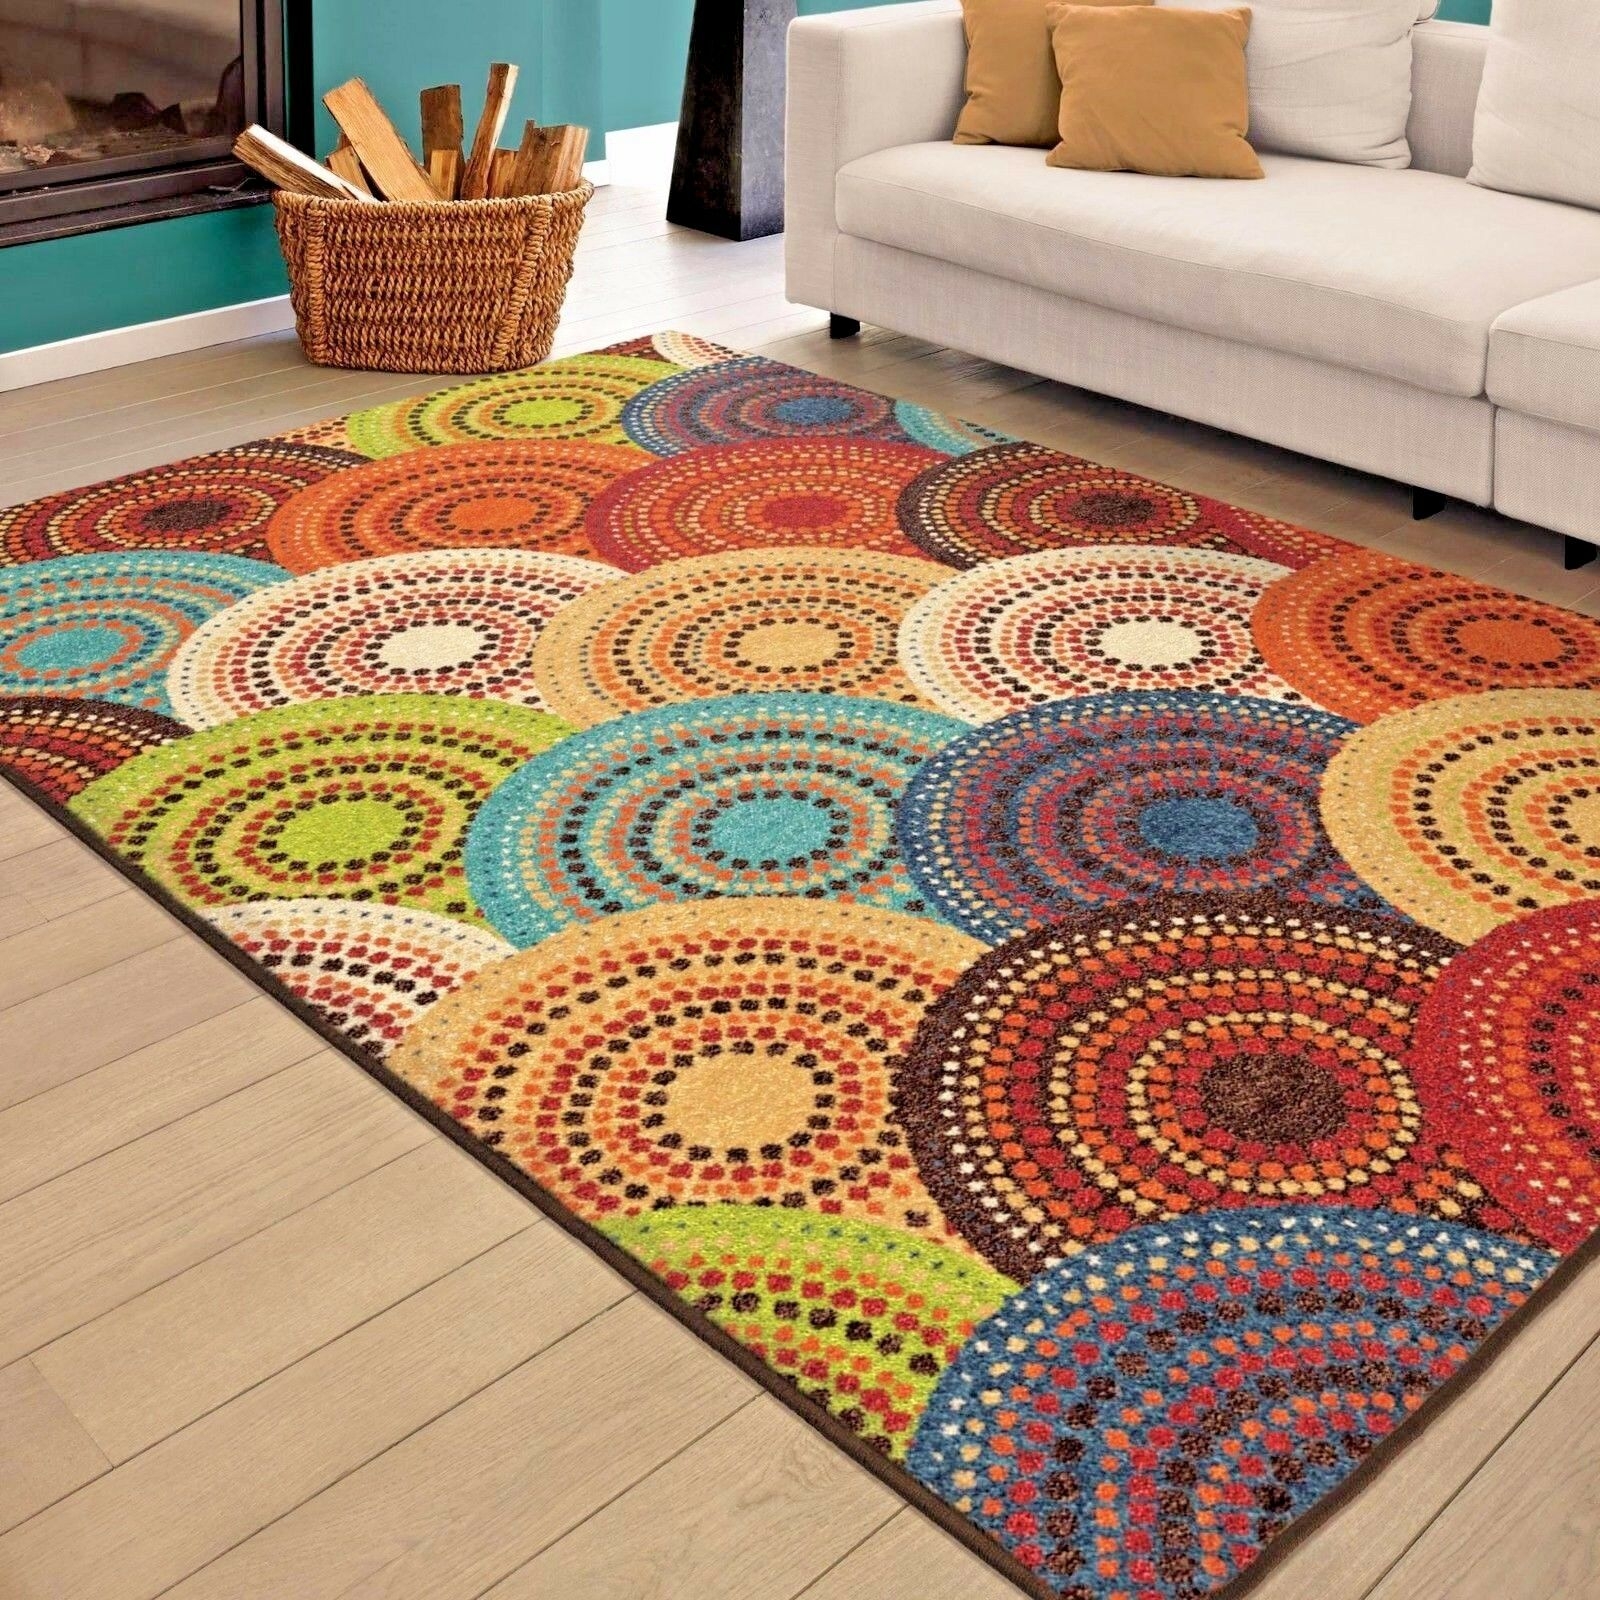 Colorful Rugs For Living Room Visualhunt, Colorful Modern Rugs